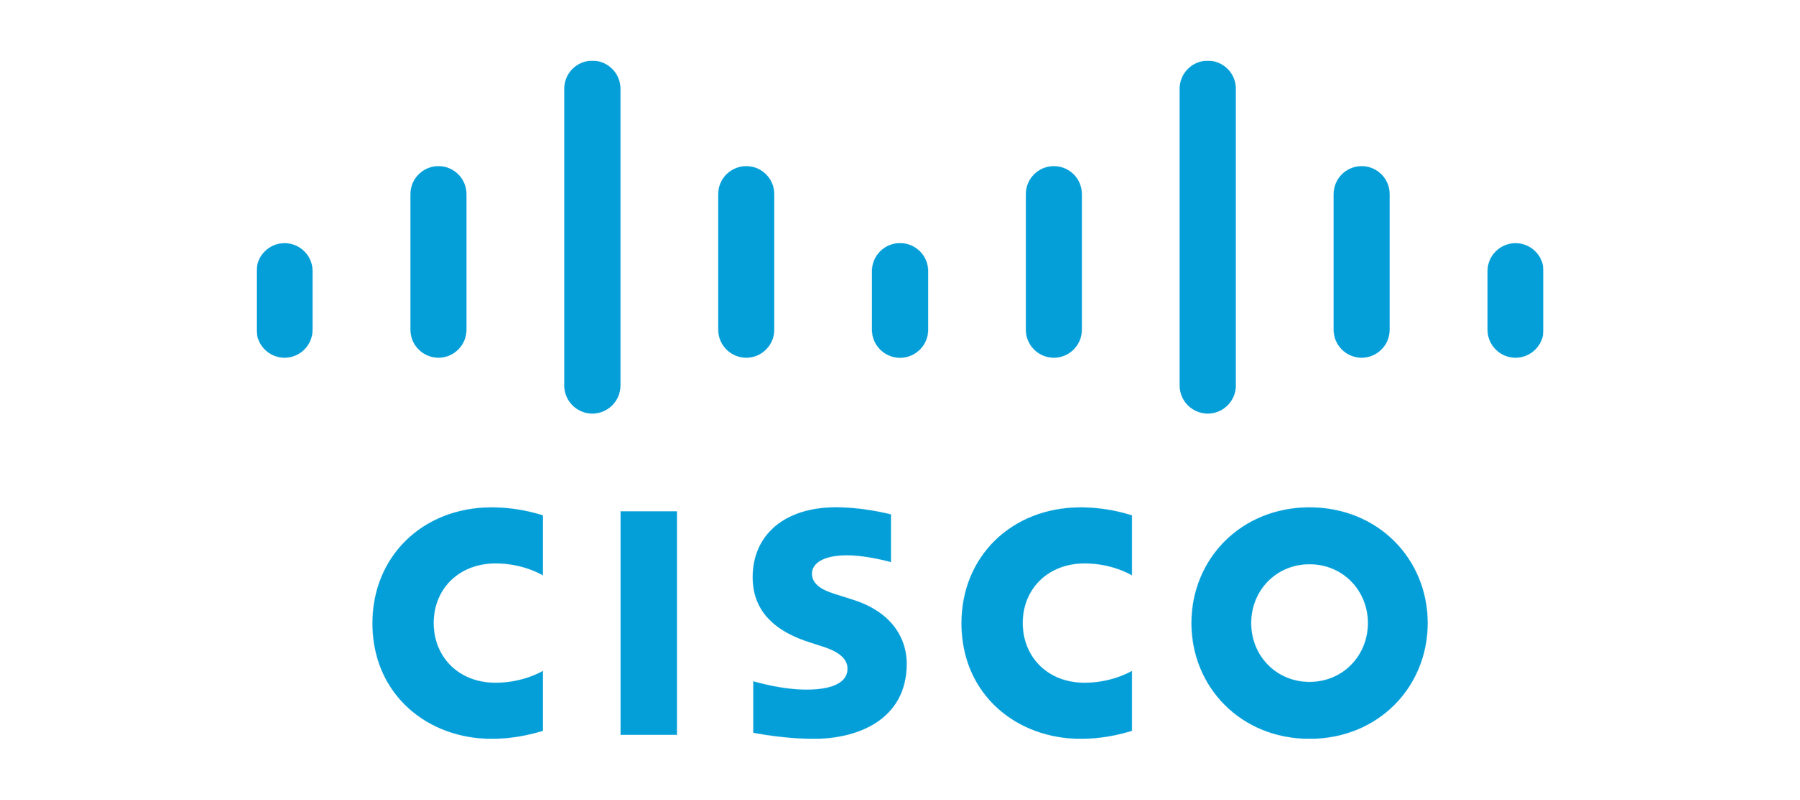 Cisco launches $1billion global AI investment fund to bolster the startup ecosystem